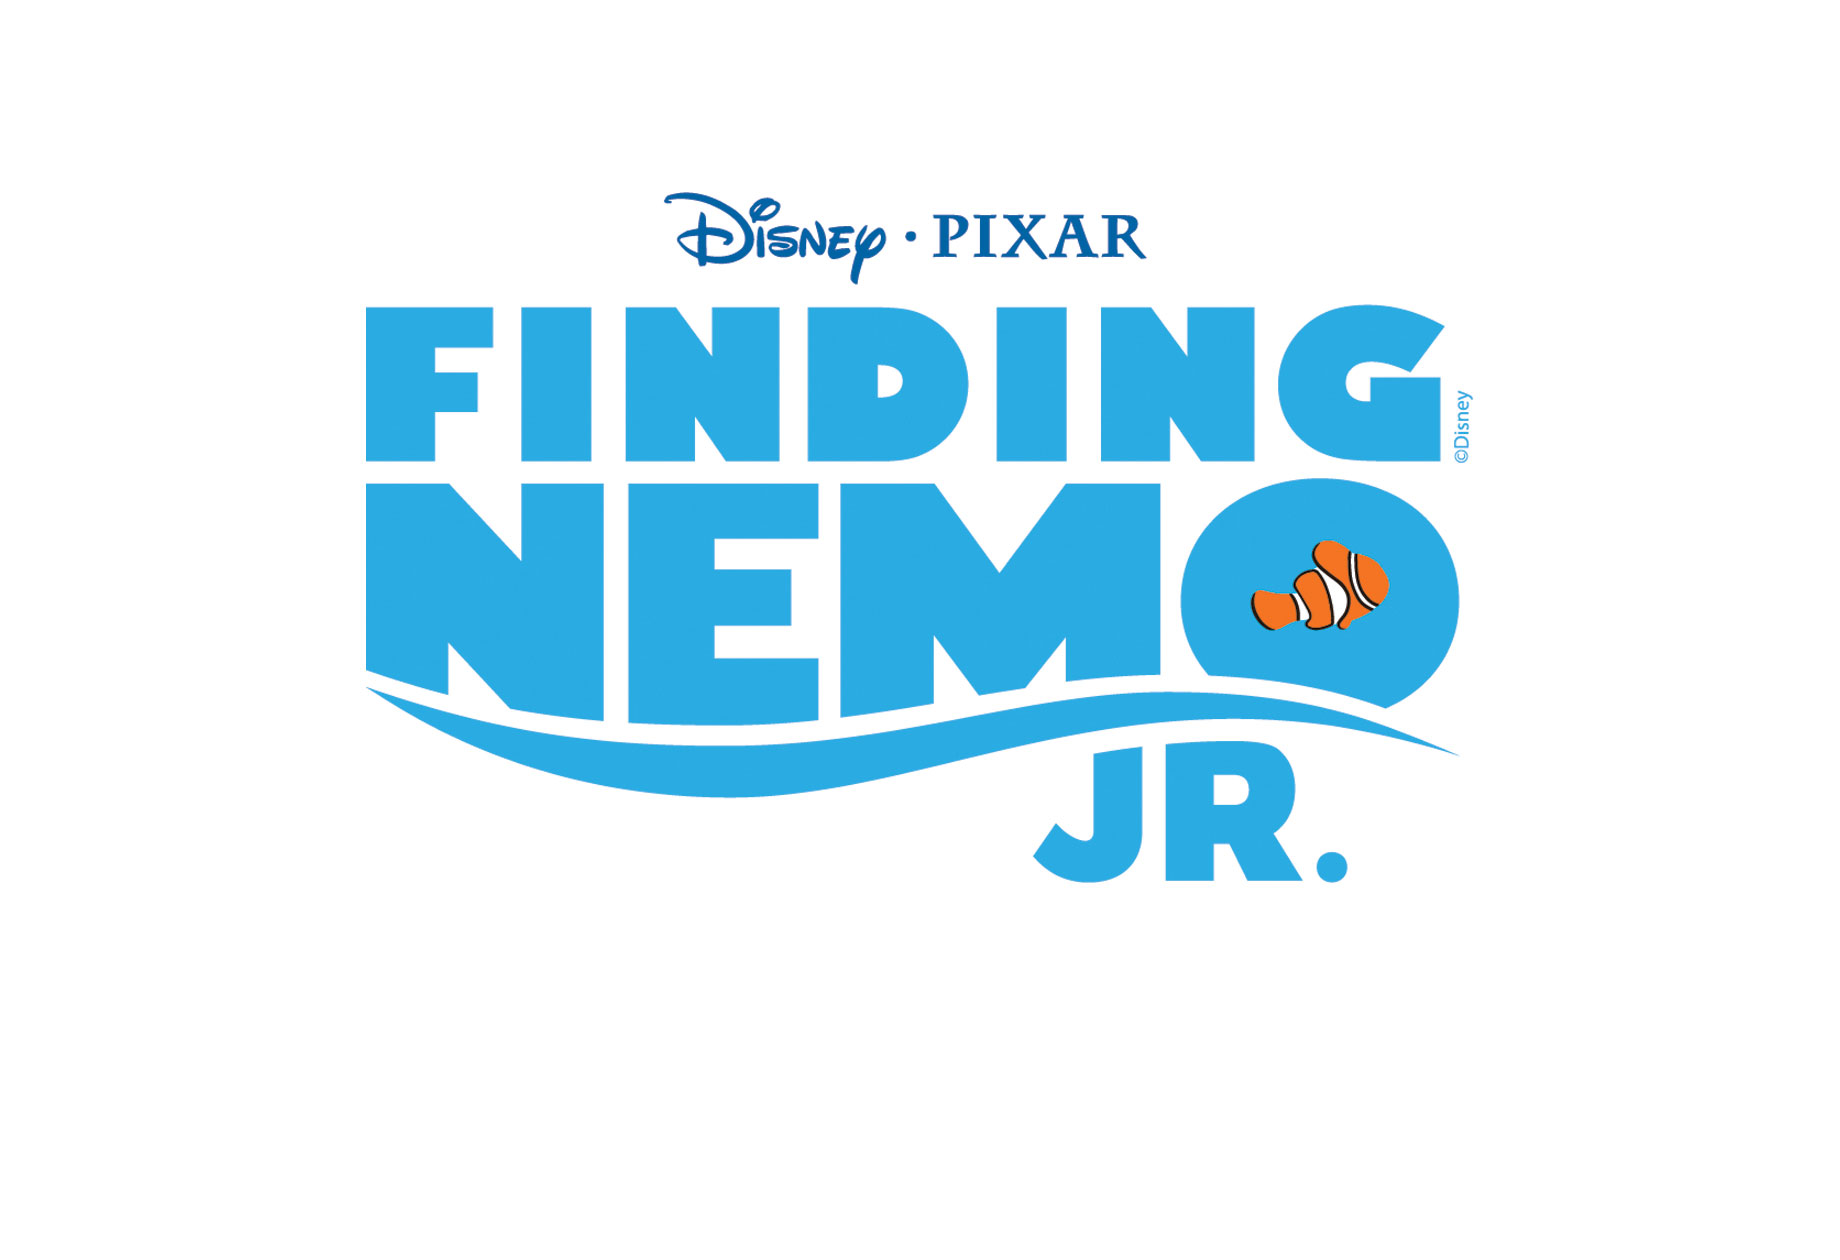 Just keep swimming with Finding Nemo Jr!